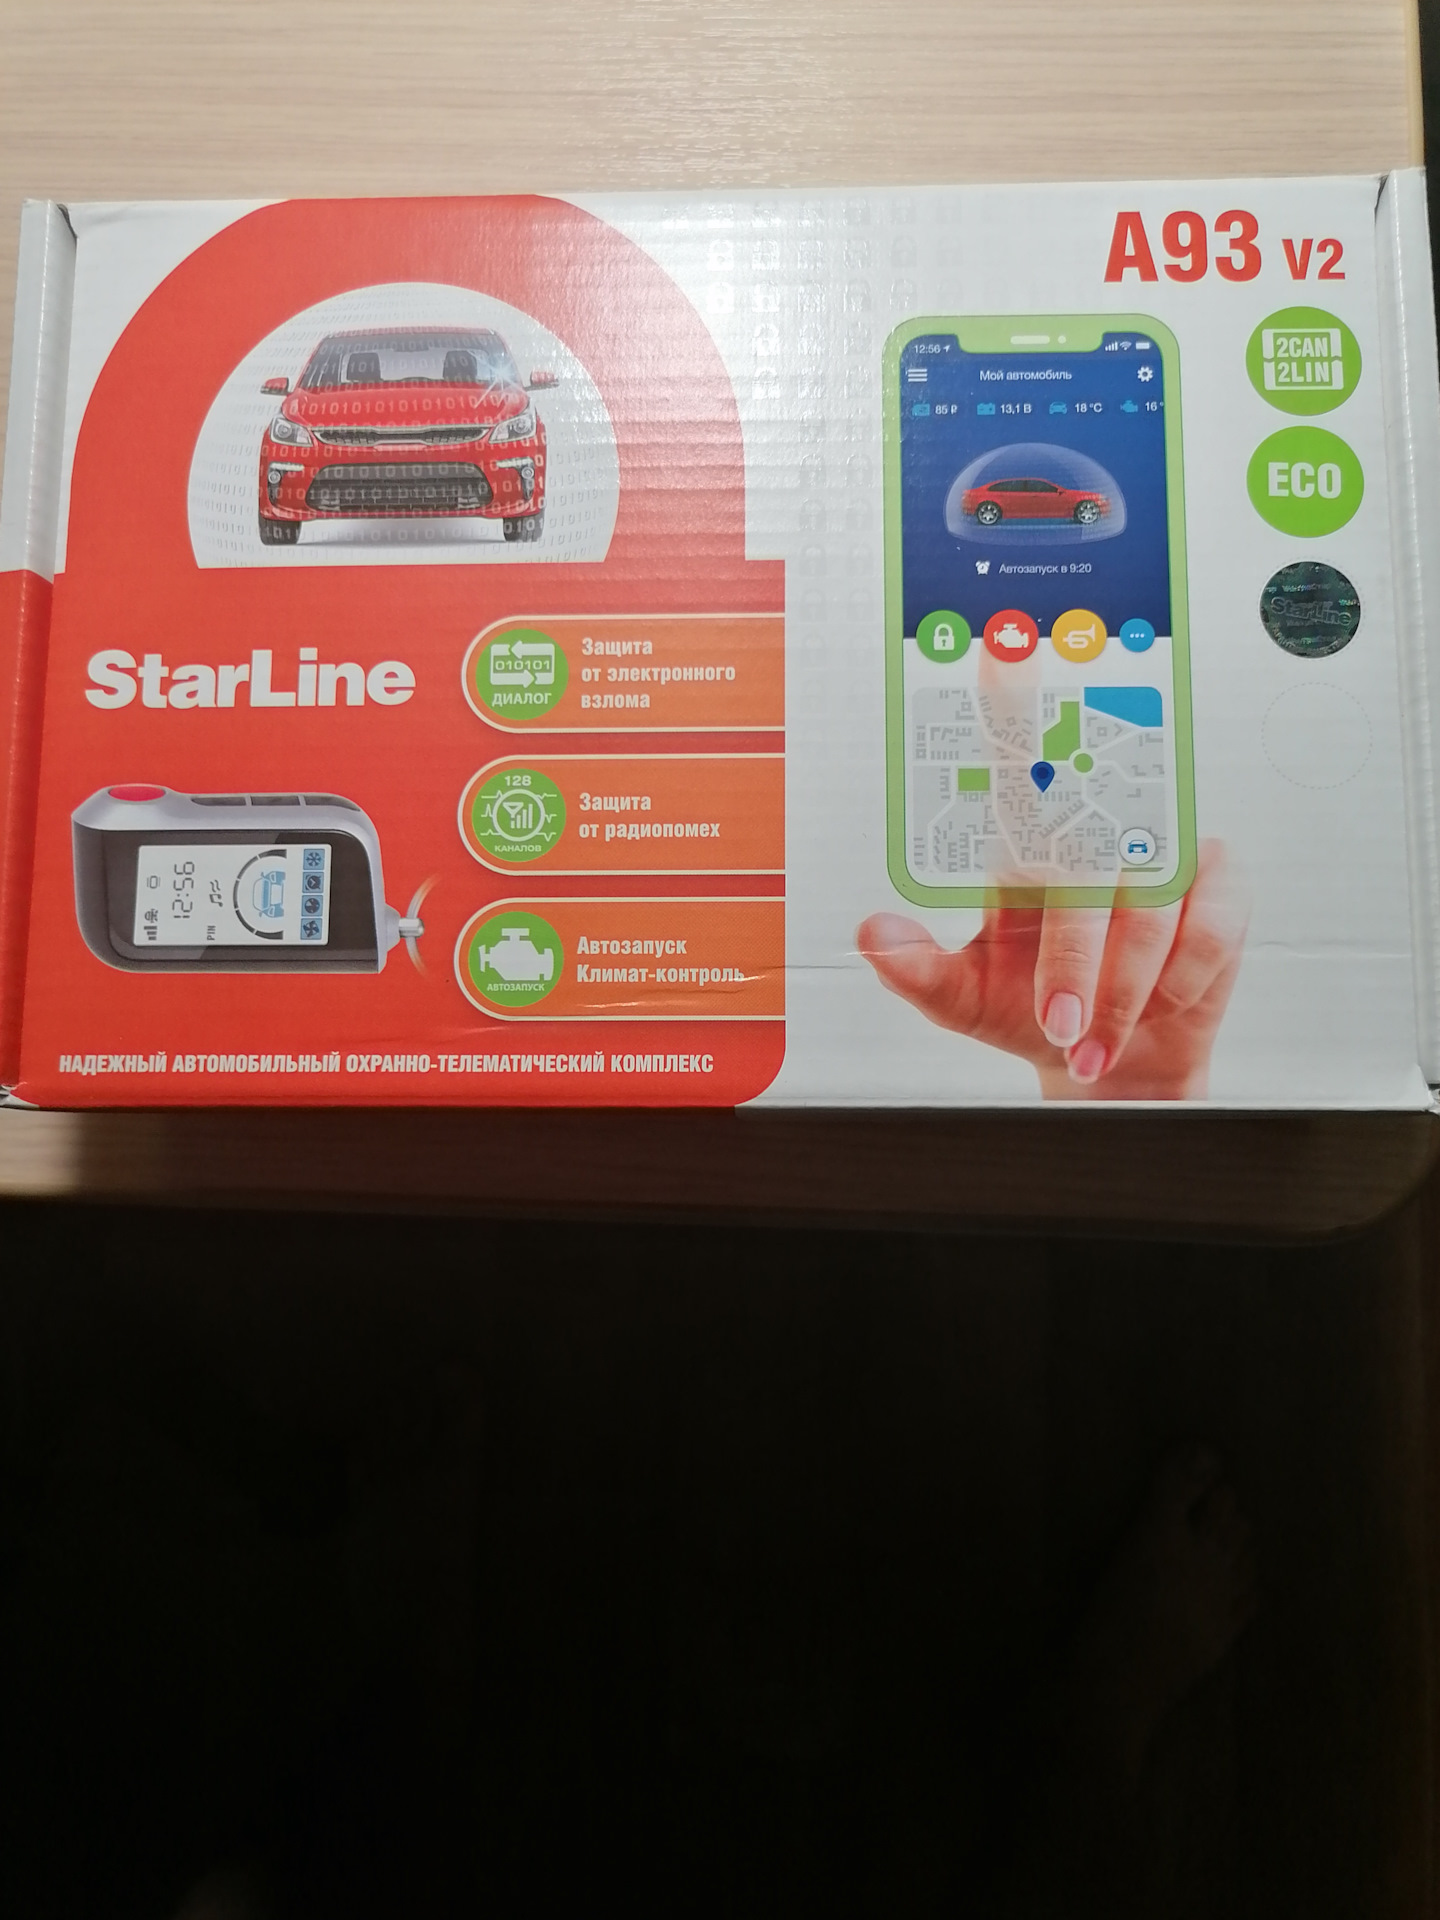 Starline 2can 2lin gsm. Старлайн а93 v2 2can 2lin GSM. STARLINE A 93 2can+2lin GSM (Eco) (4sim). Старлайн а93 2can 2lin Eco. STARLINE a93 v2 2can+2lin Eco.